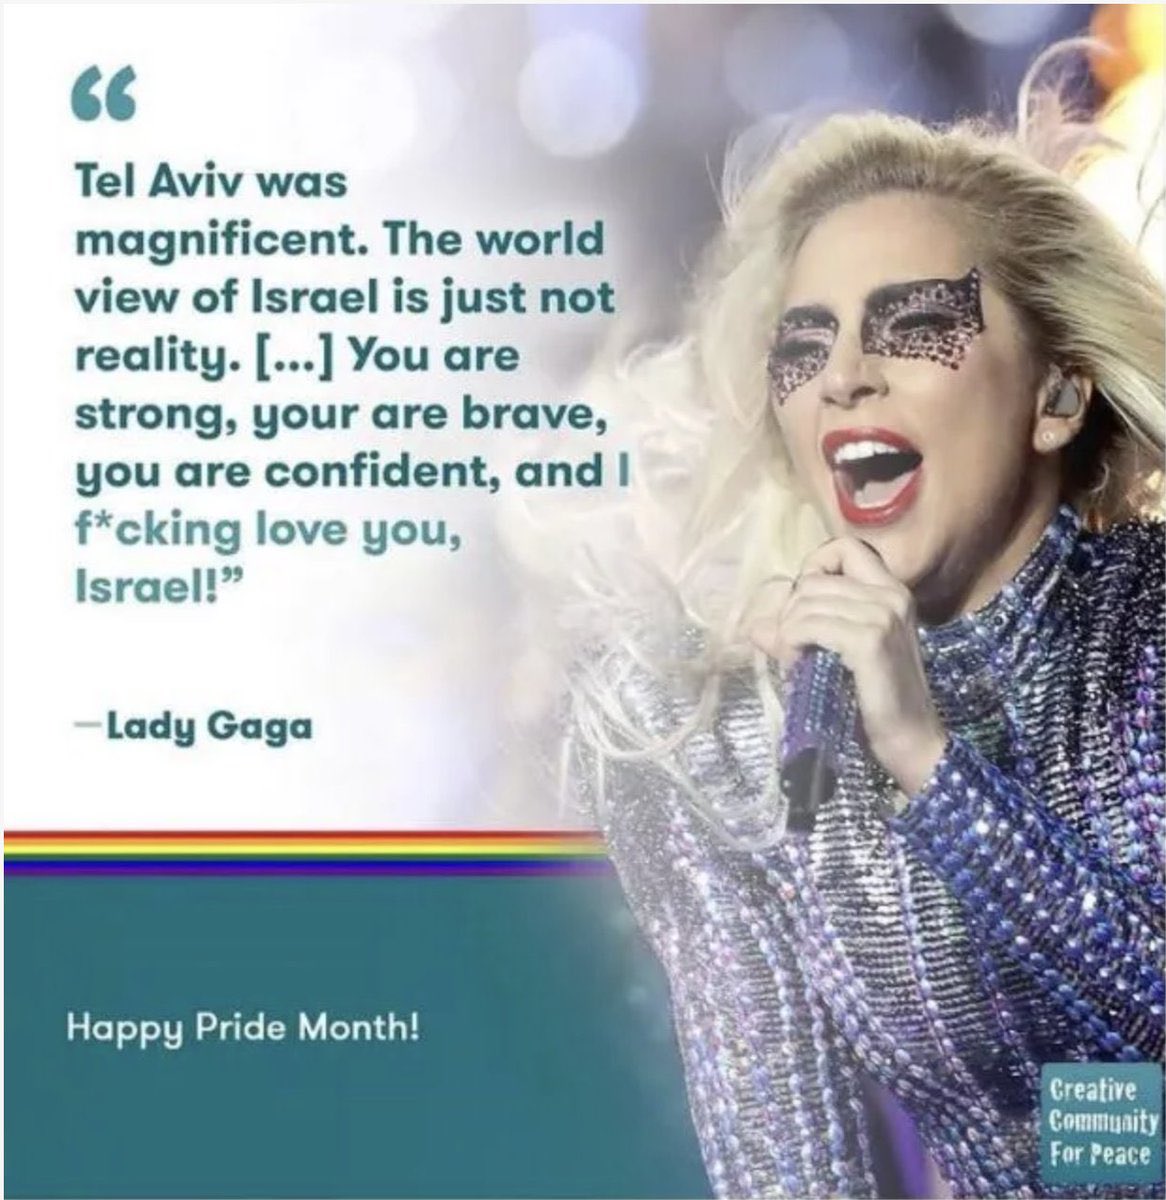 random reminder that lady gaga is a Zionist <3
she’s performed multiple times in Tel Aviv and took action to reject the BDS movement. a celebrity that stands with Israel stands for nothing but destruction.